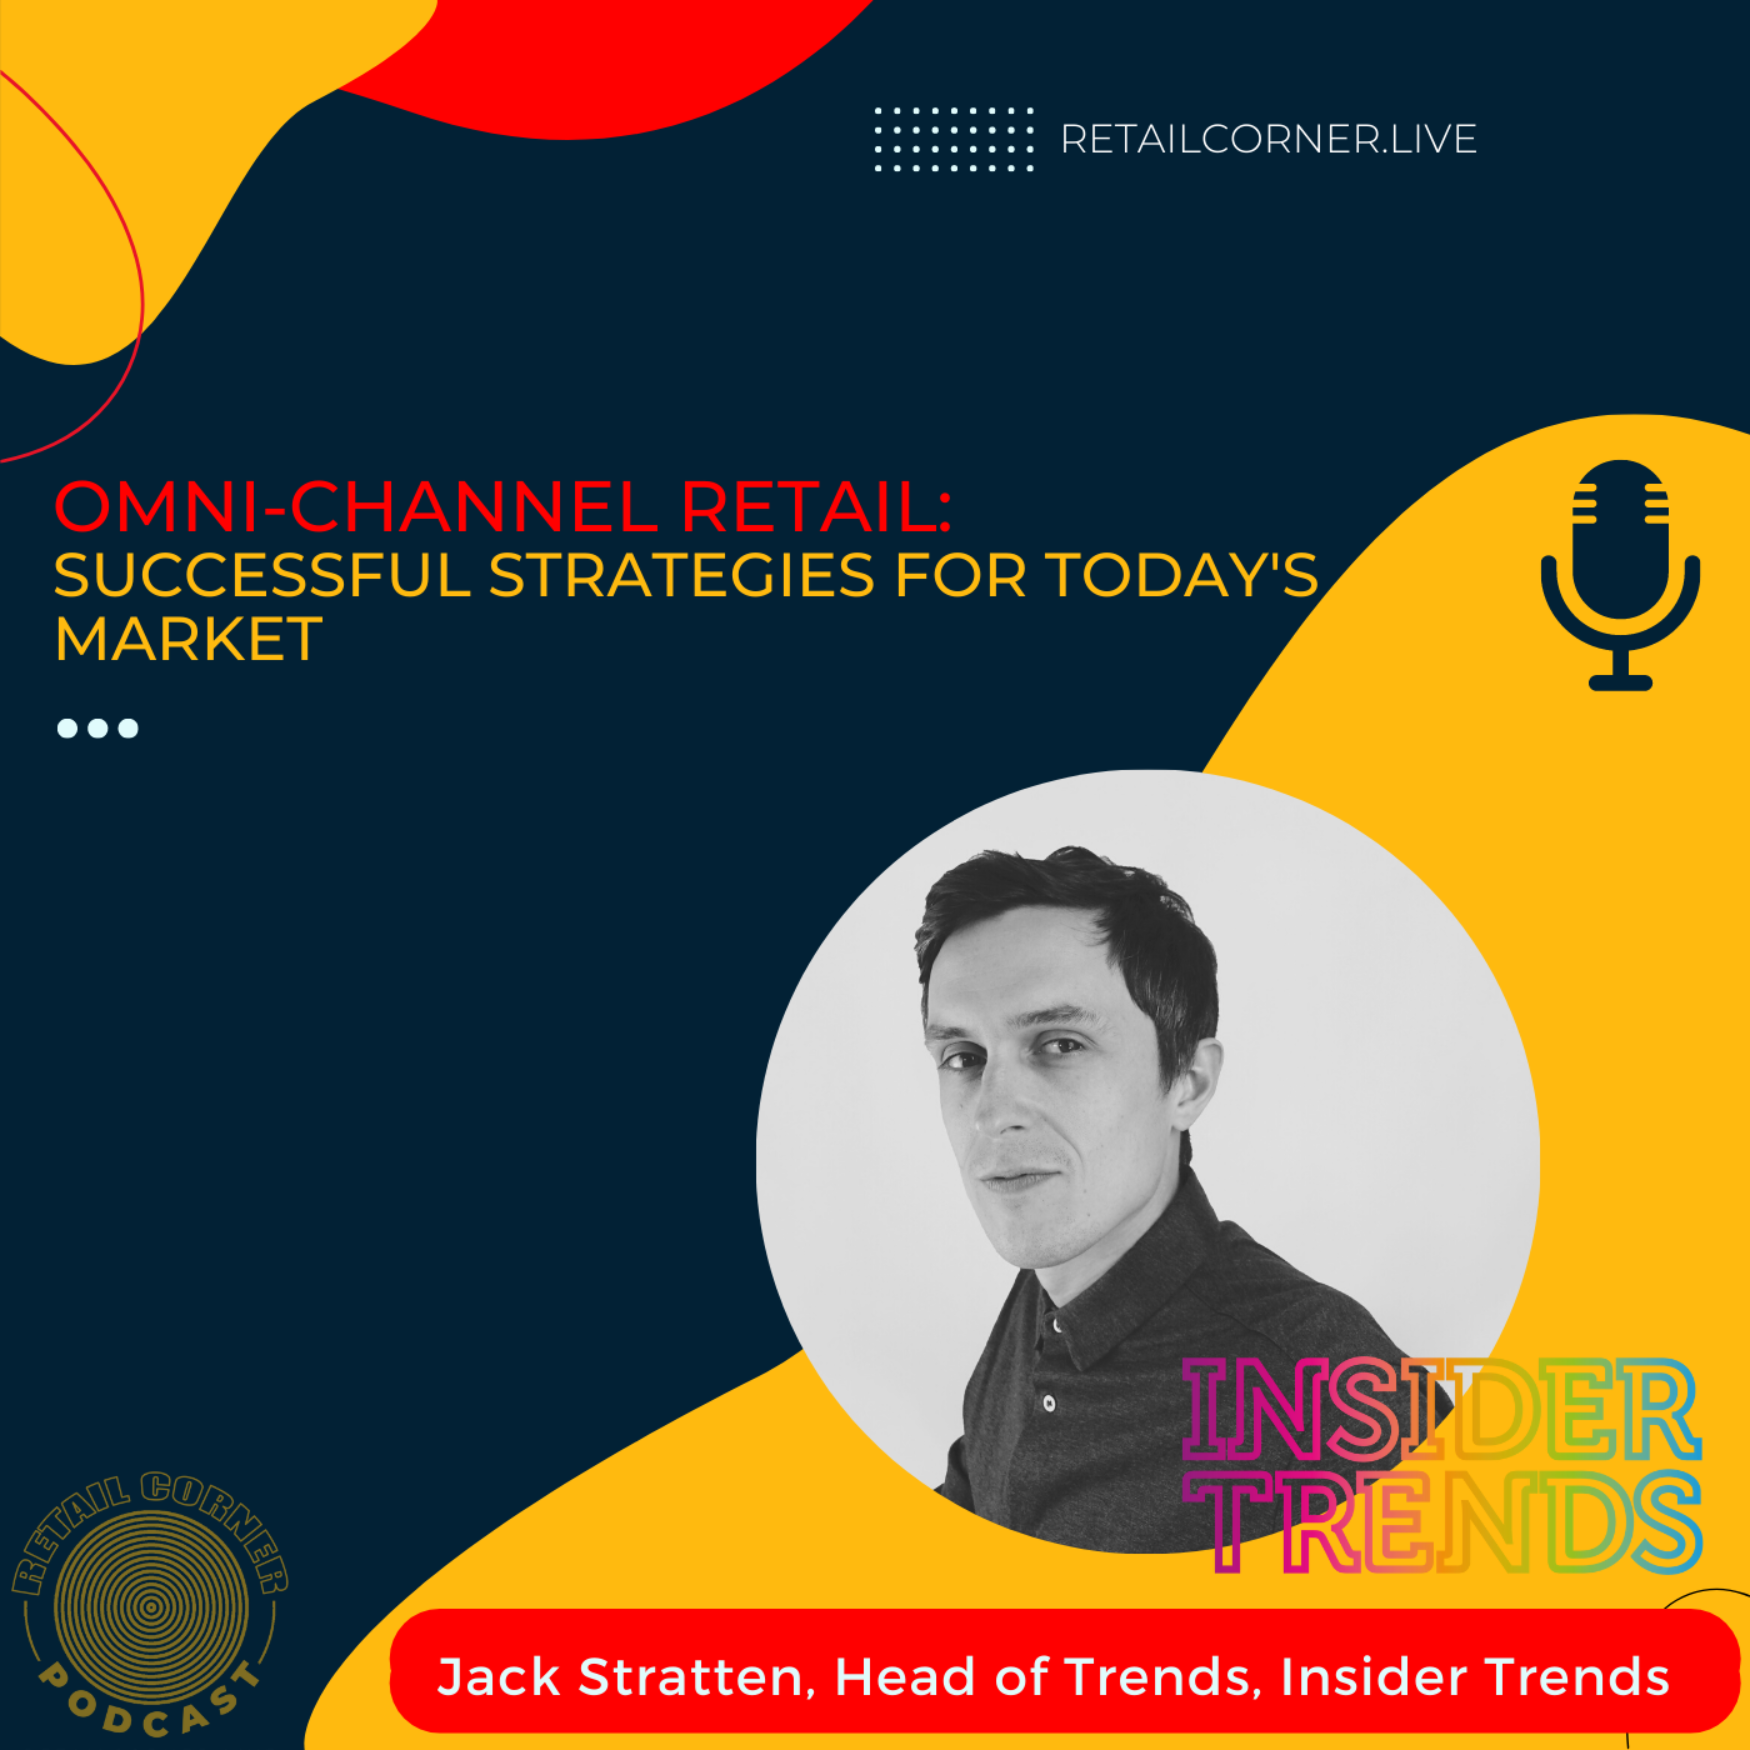 Omni-channel Retail: Successful Strategies for Today’s Market Image